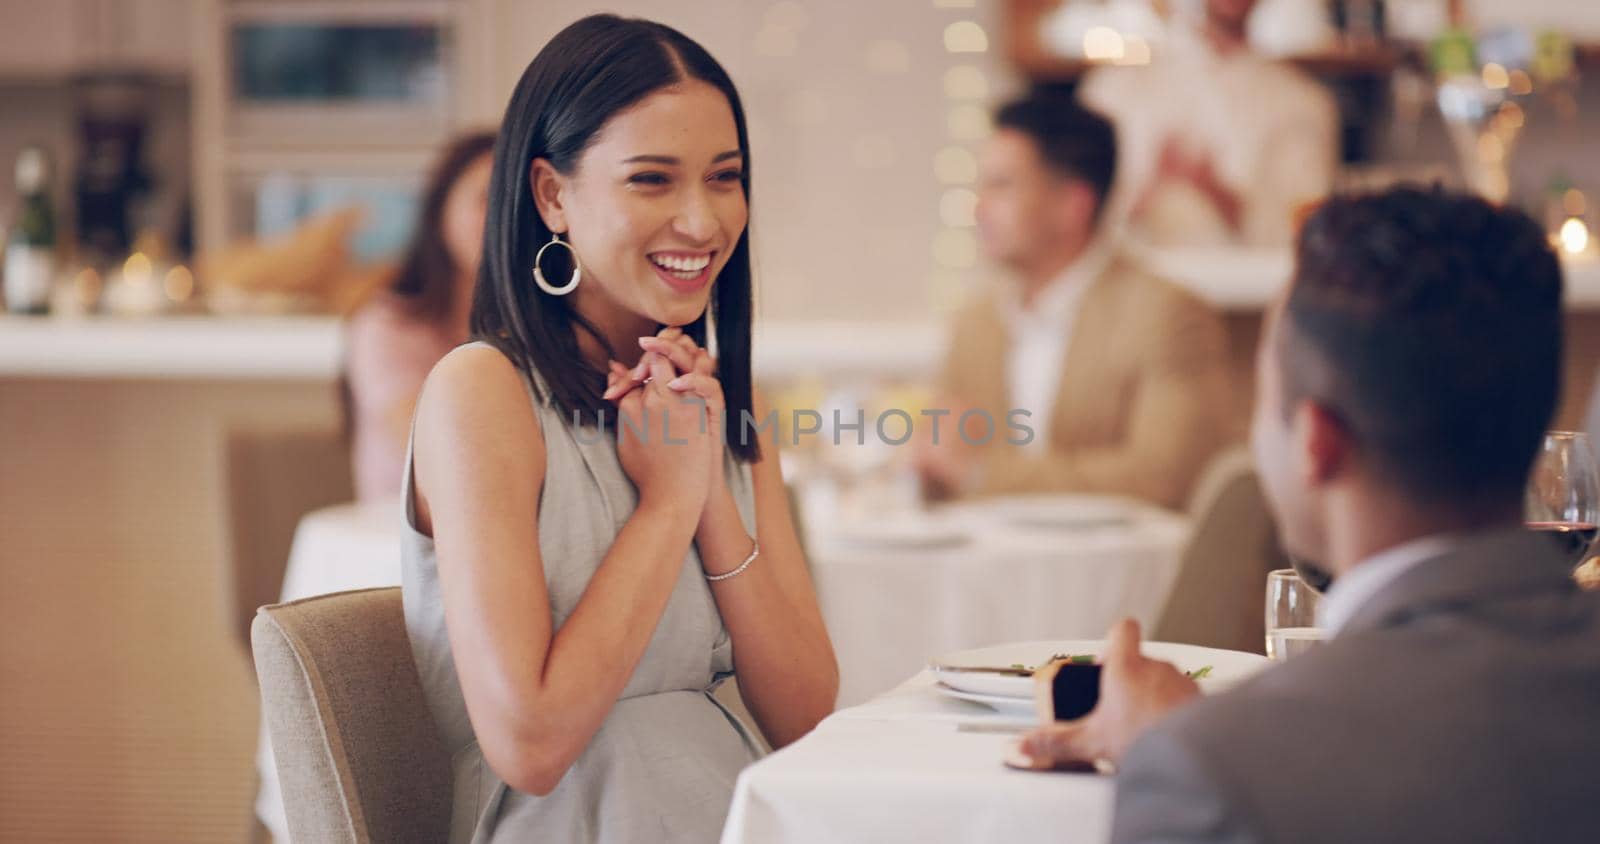 4k video footage of a woman looking surprised while her boyfriend proposes at a restaurant